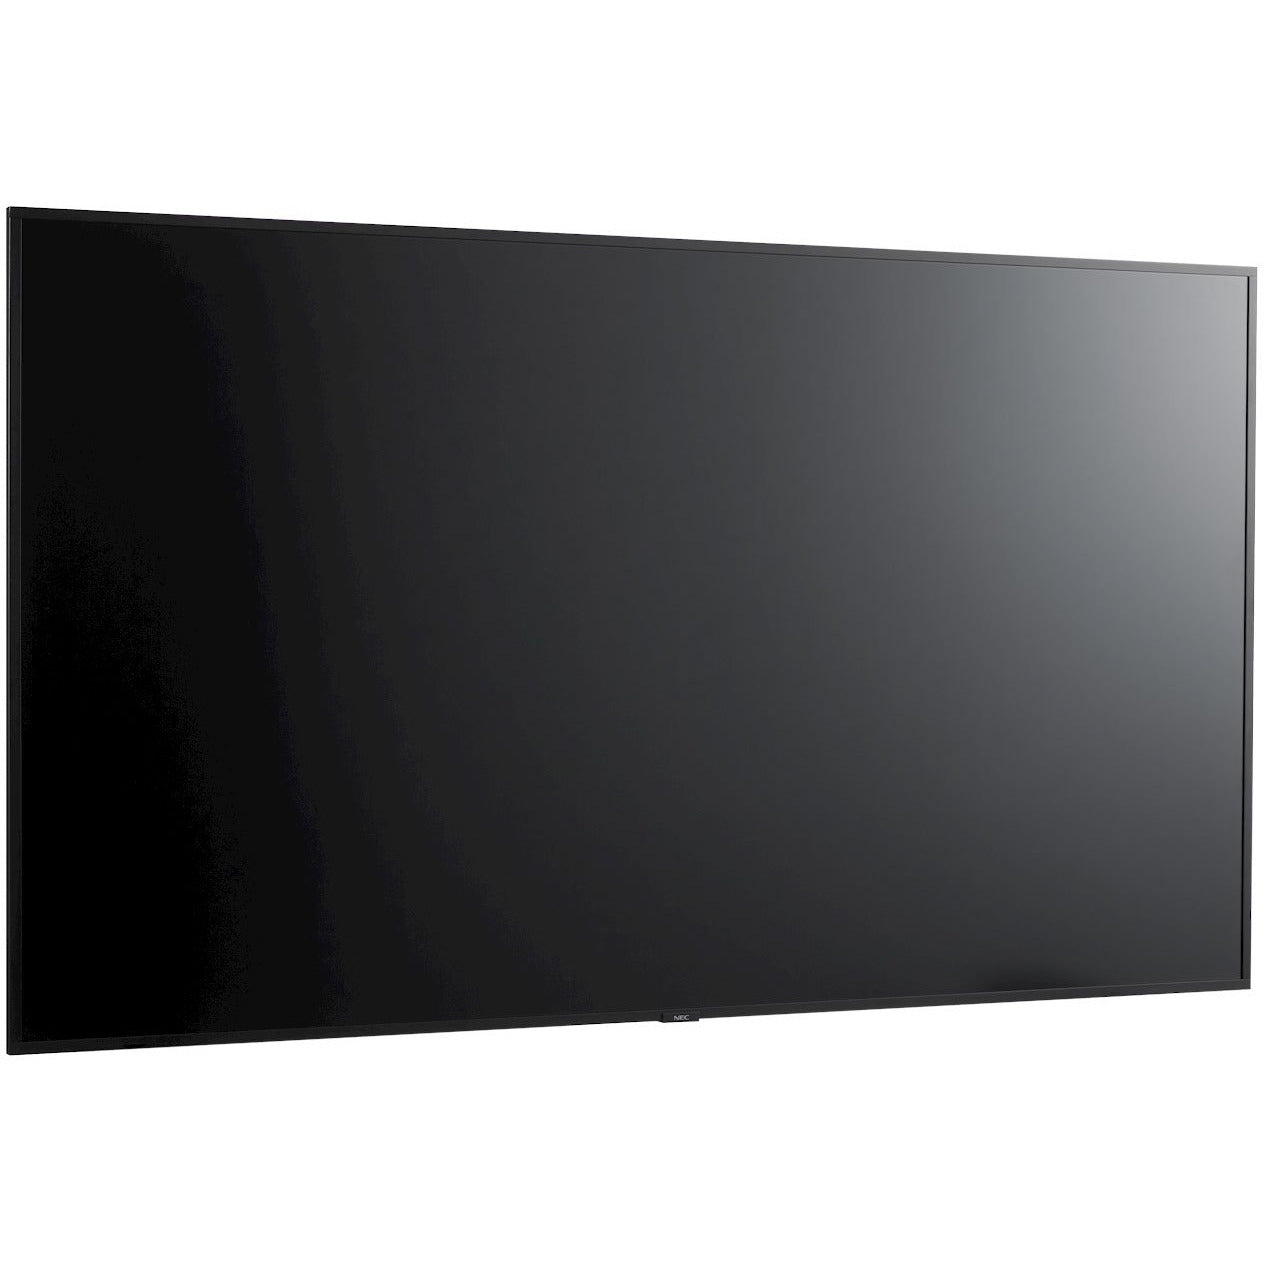 NEC MultiSync® E758 LCD 75" Essential Large Format Display